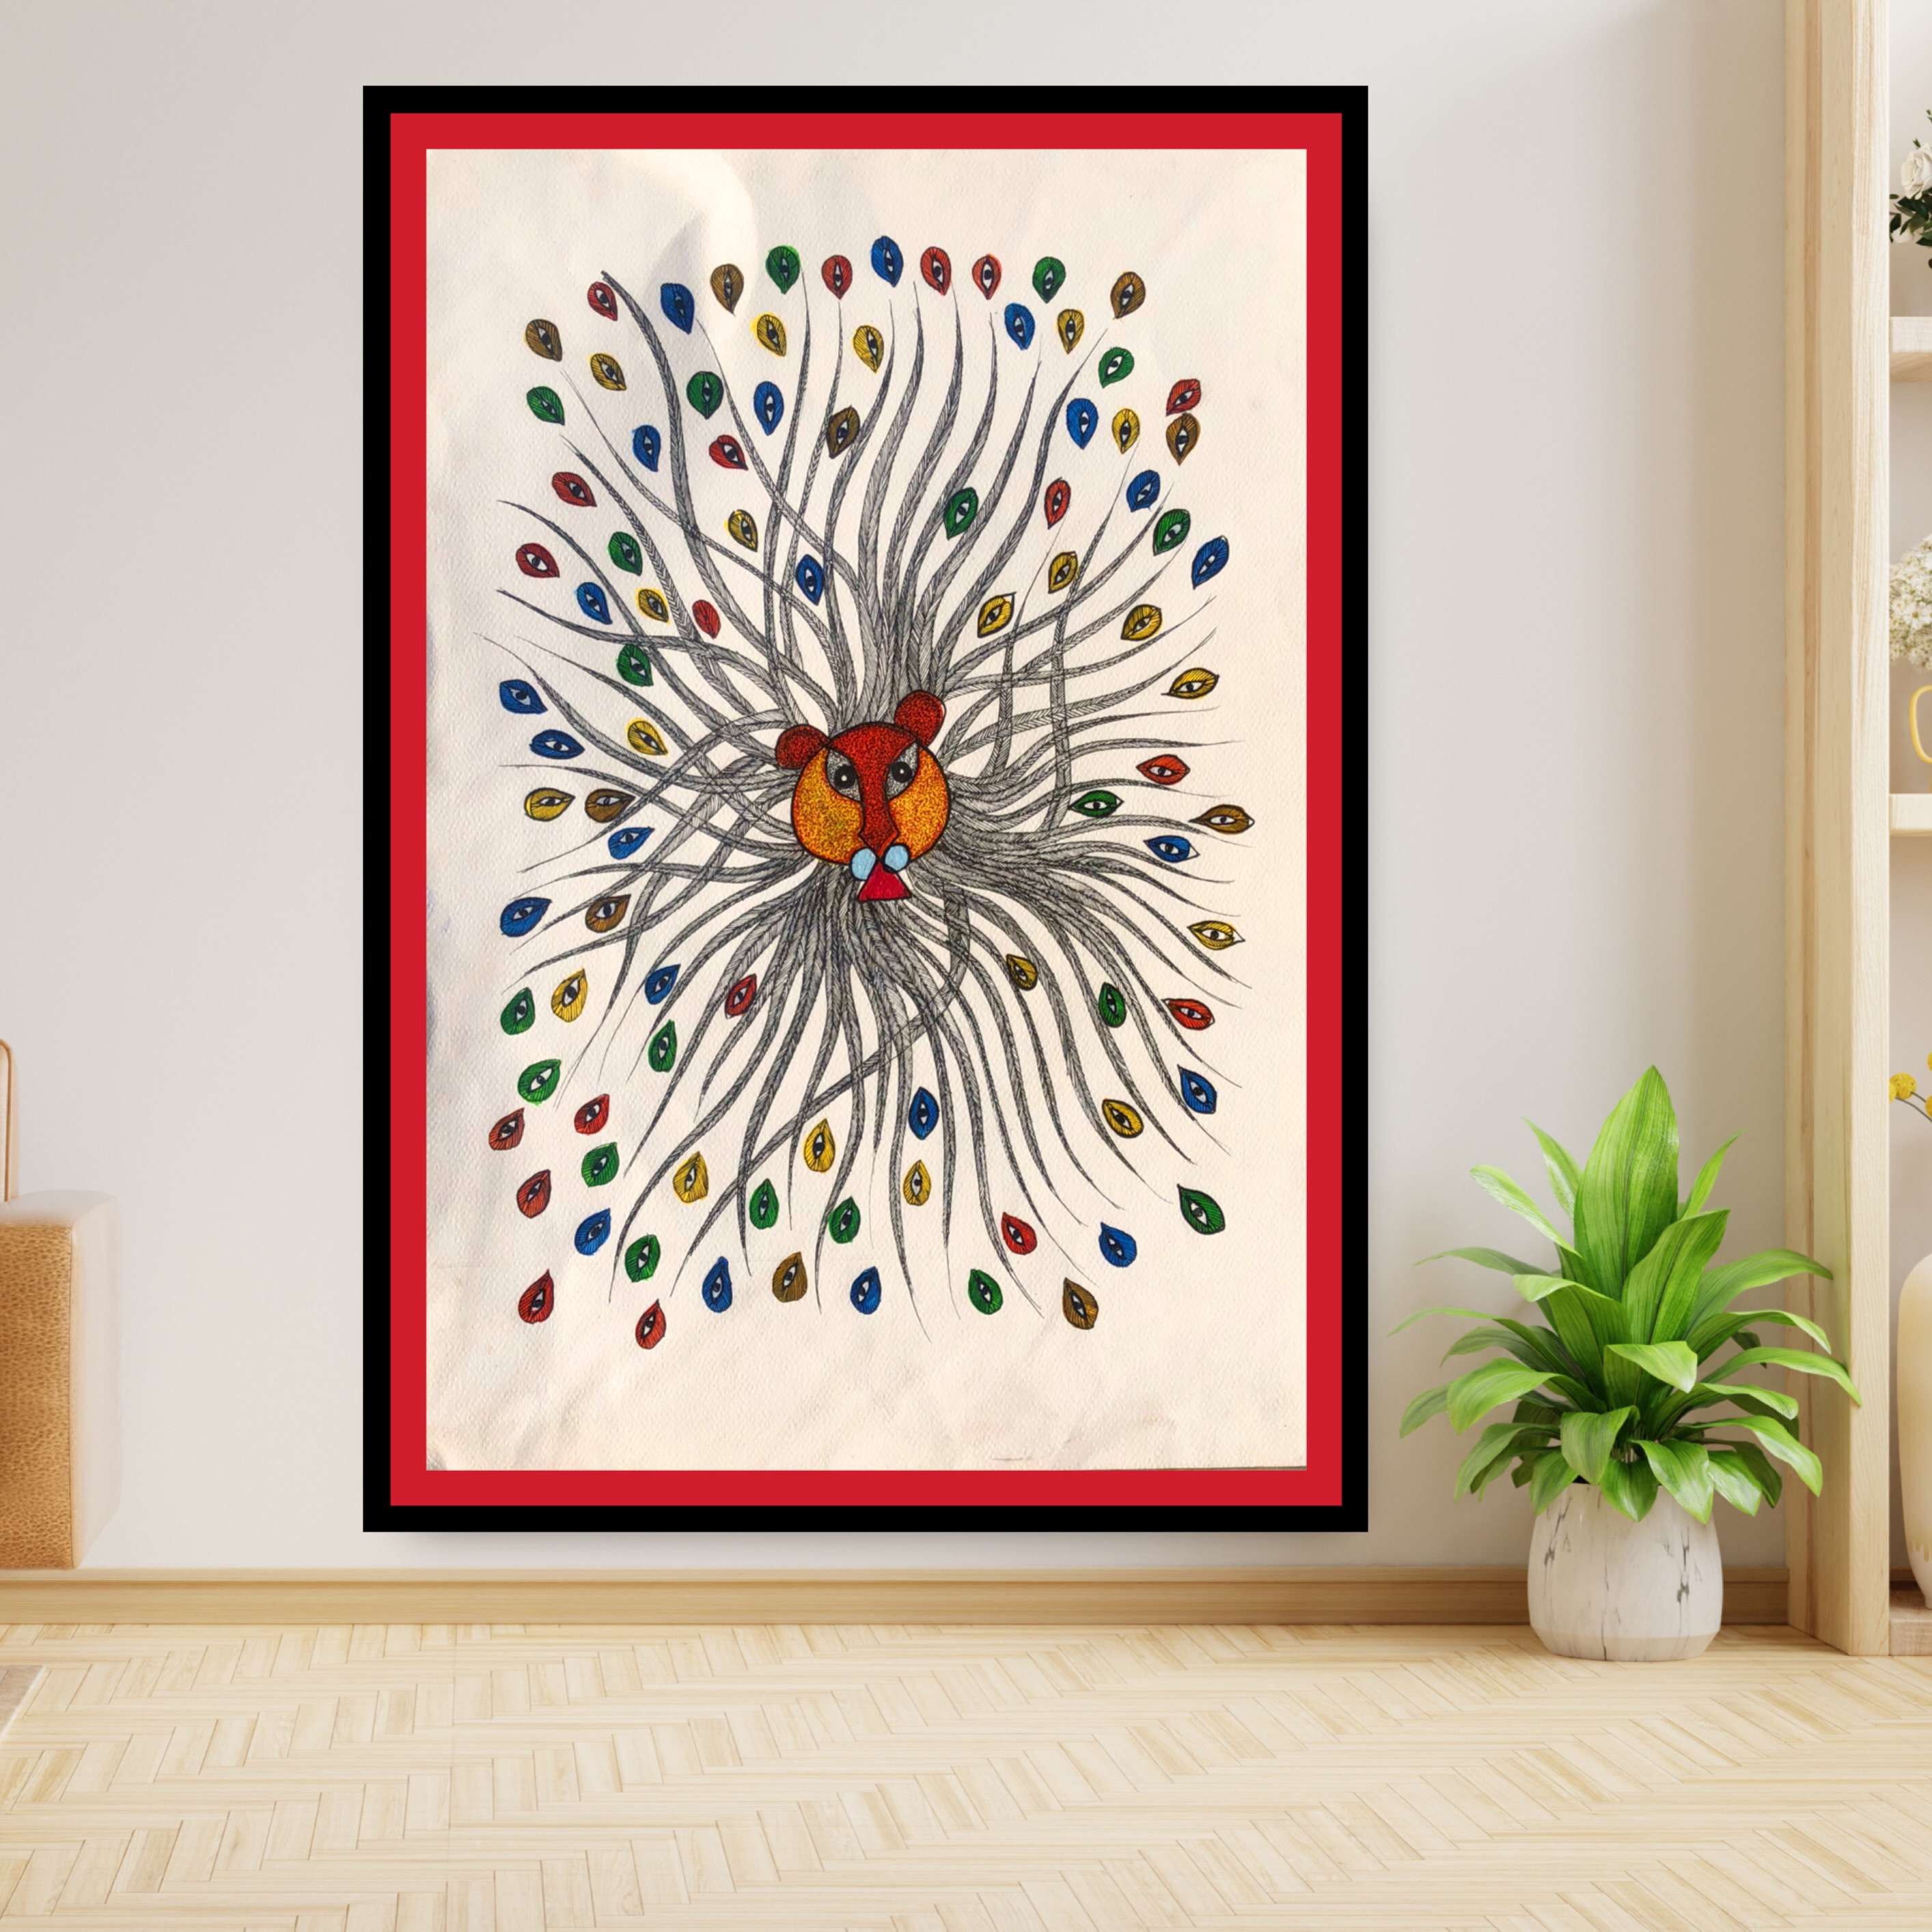 Framed Traditional Gond Art Painting for Home & Office Wall Decoration